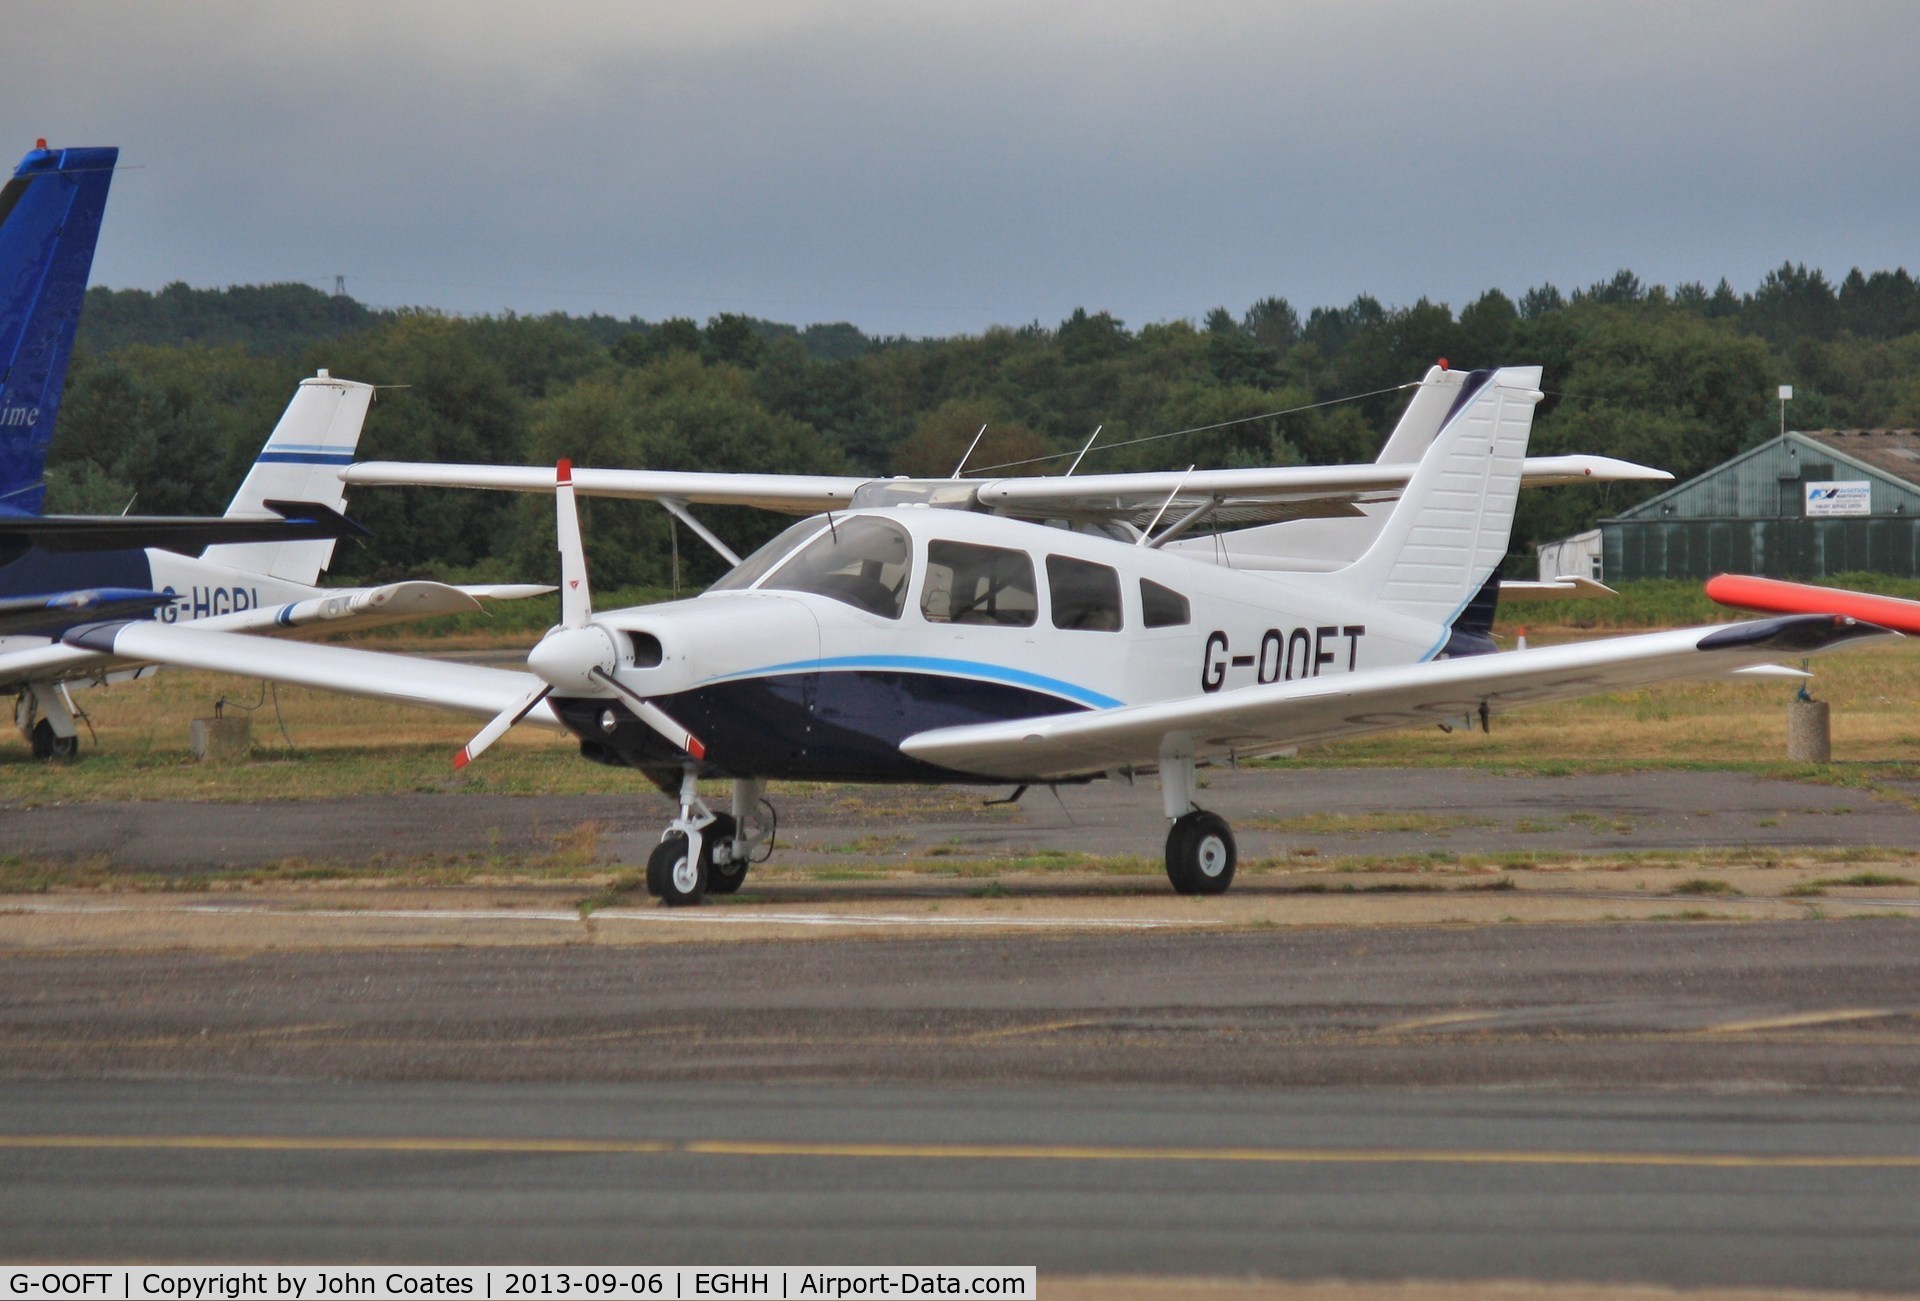 G-OOFT, 2000 Piper PA-28-161 C/N 2842083, Recently repainted